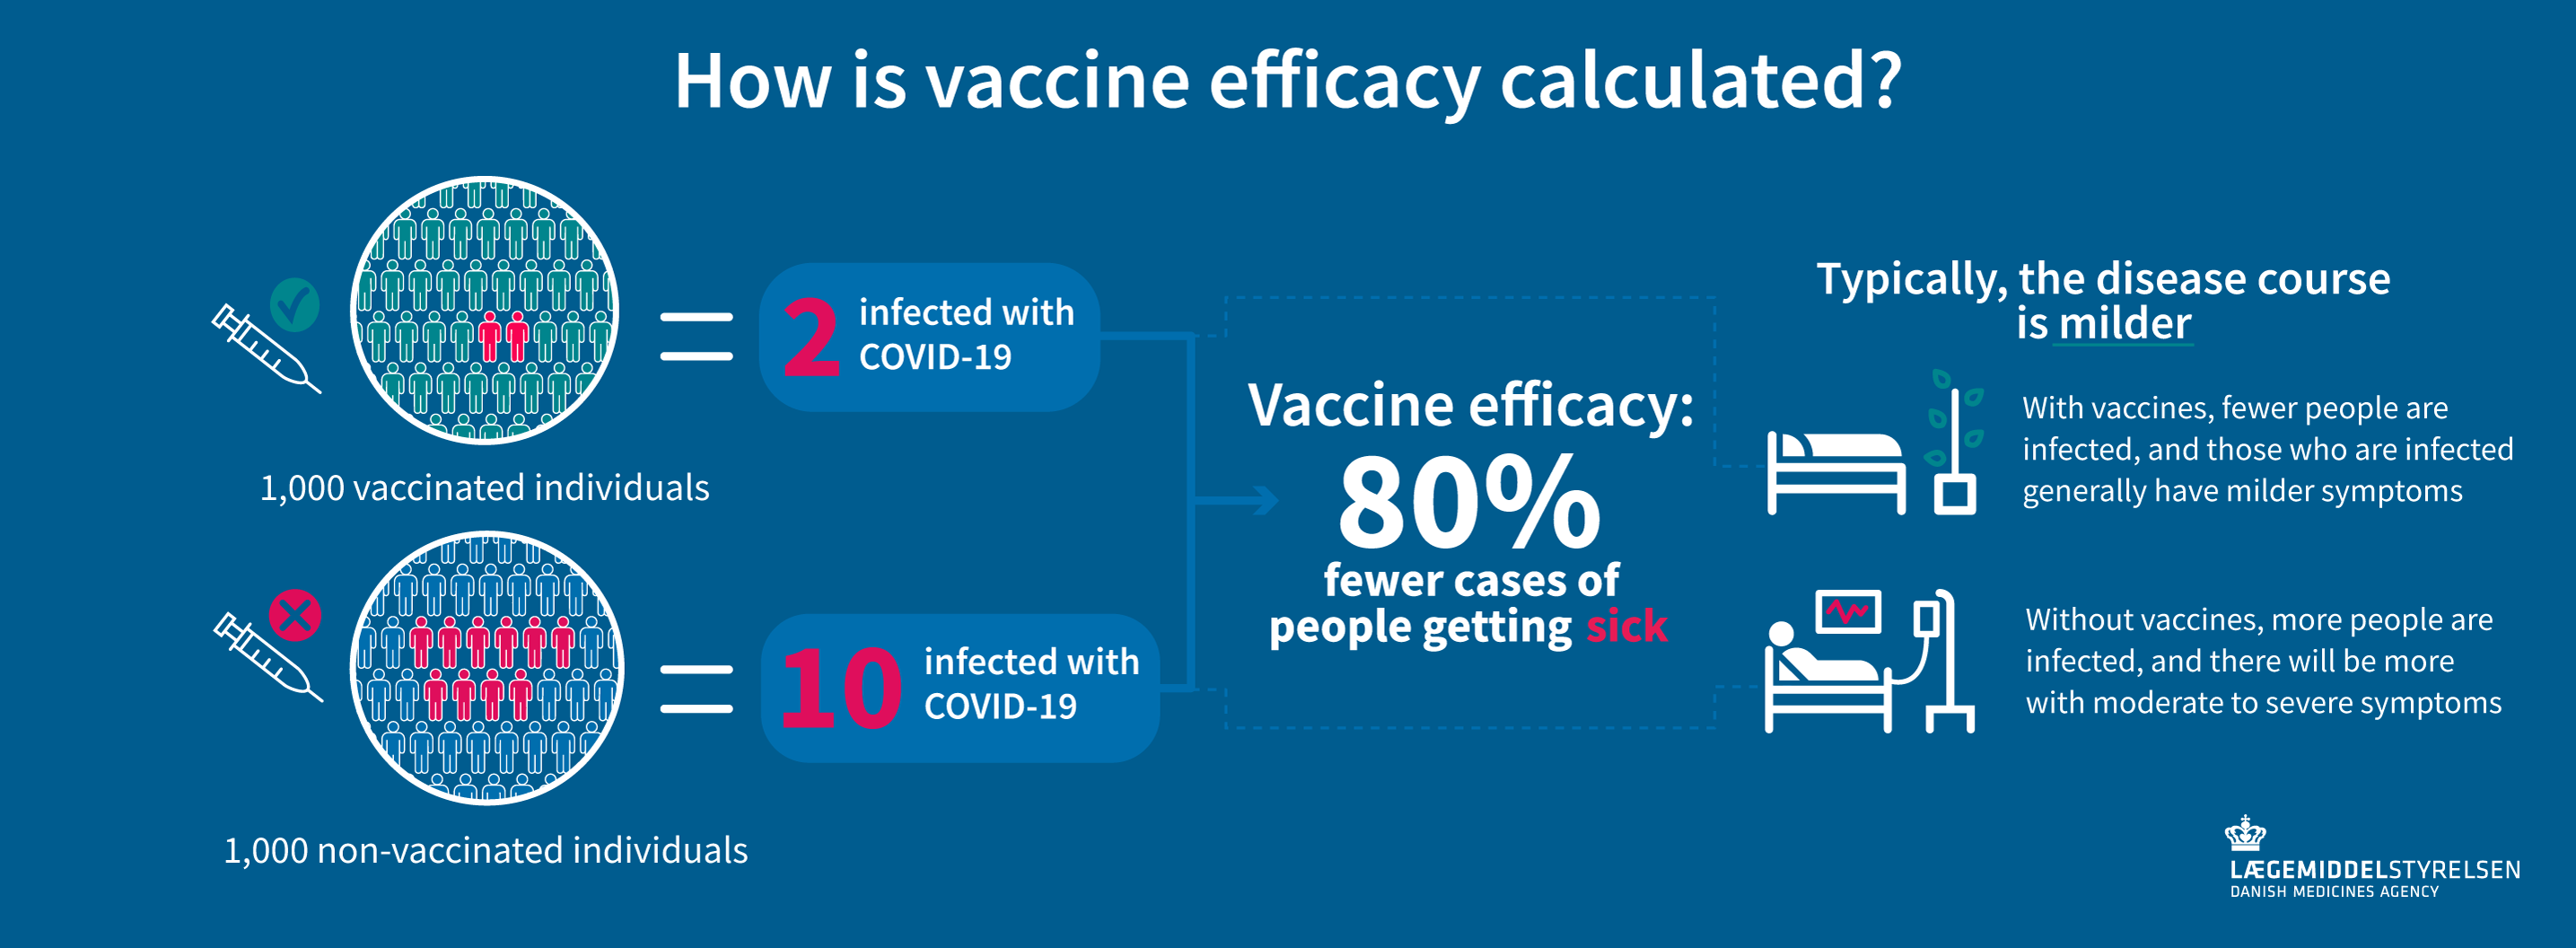 how is vaccine efficacy calculated